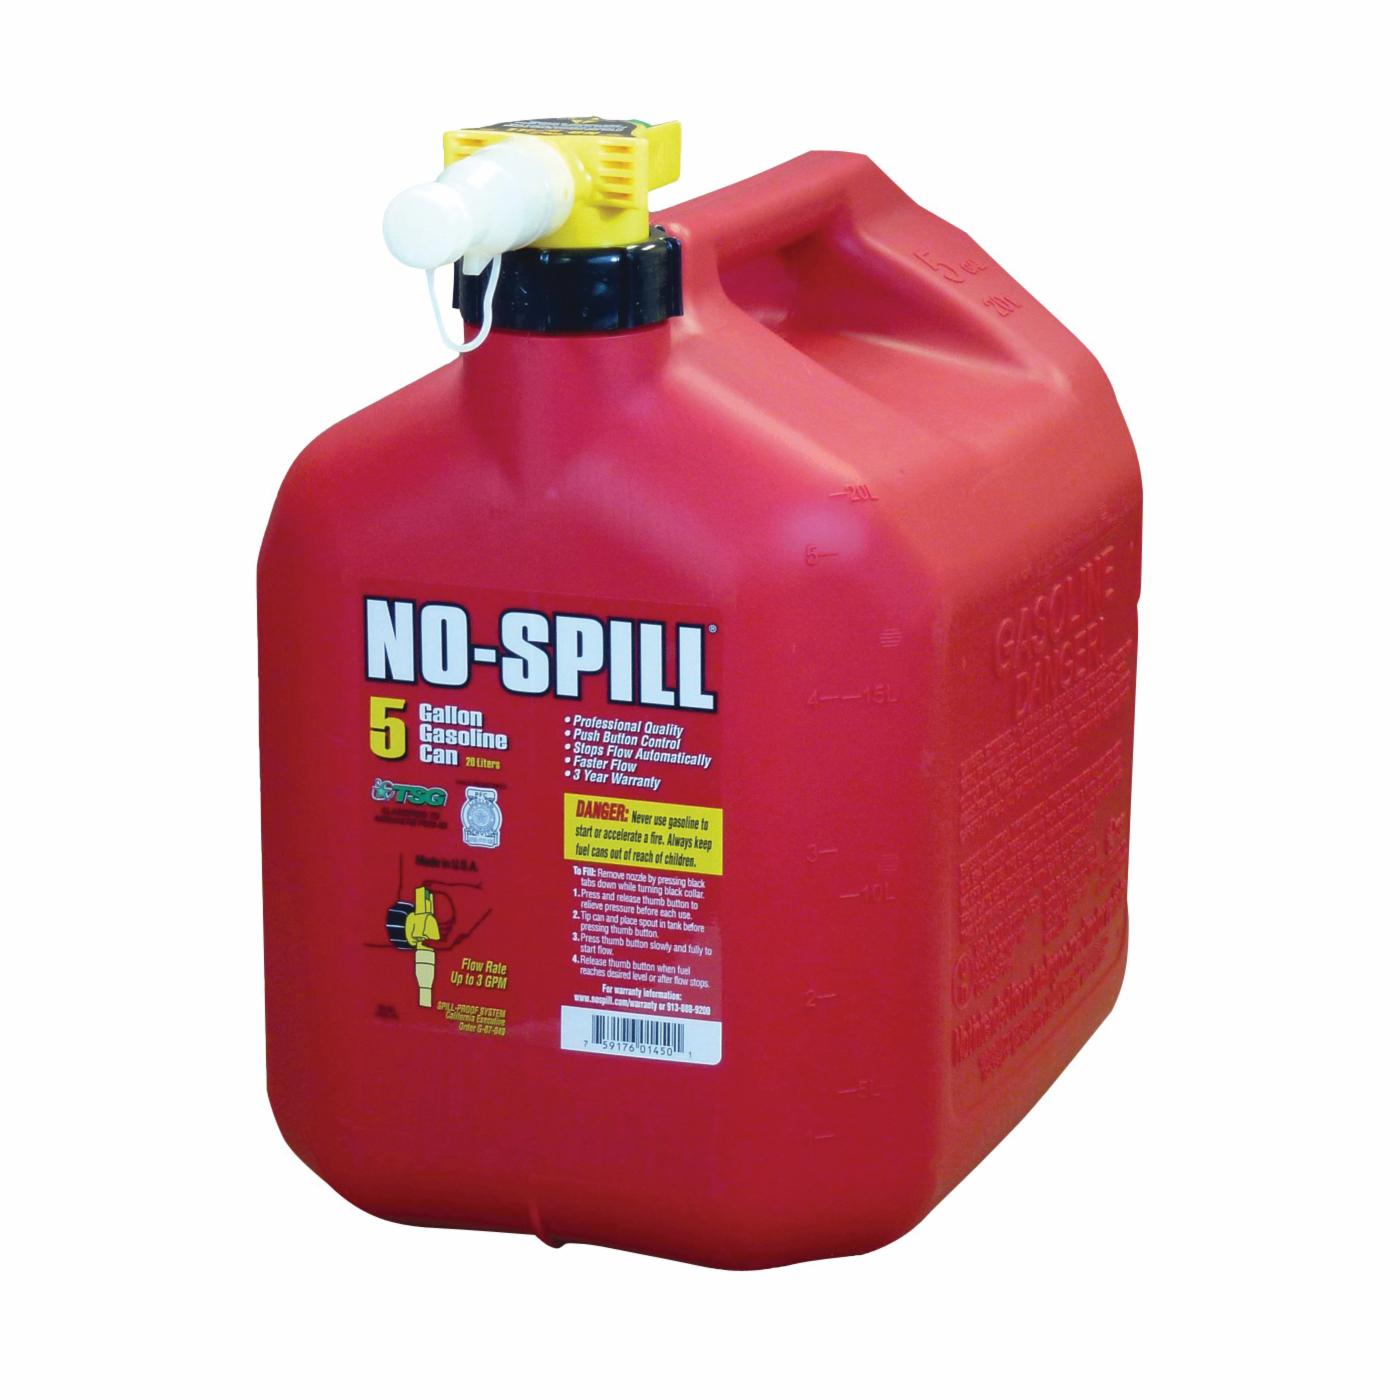 No-Spill 1450 Gas Can, 5 gal Capacity, Plastic, Red - 1